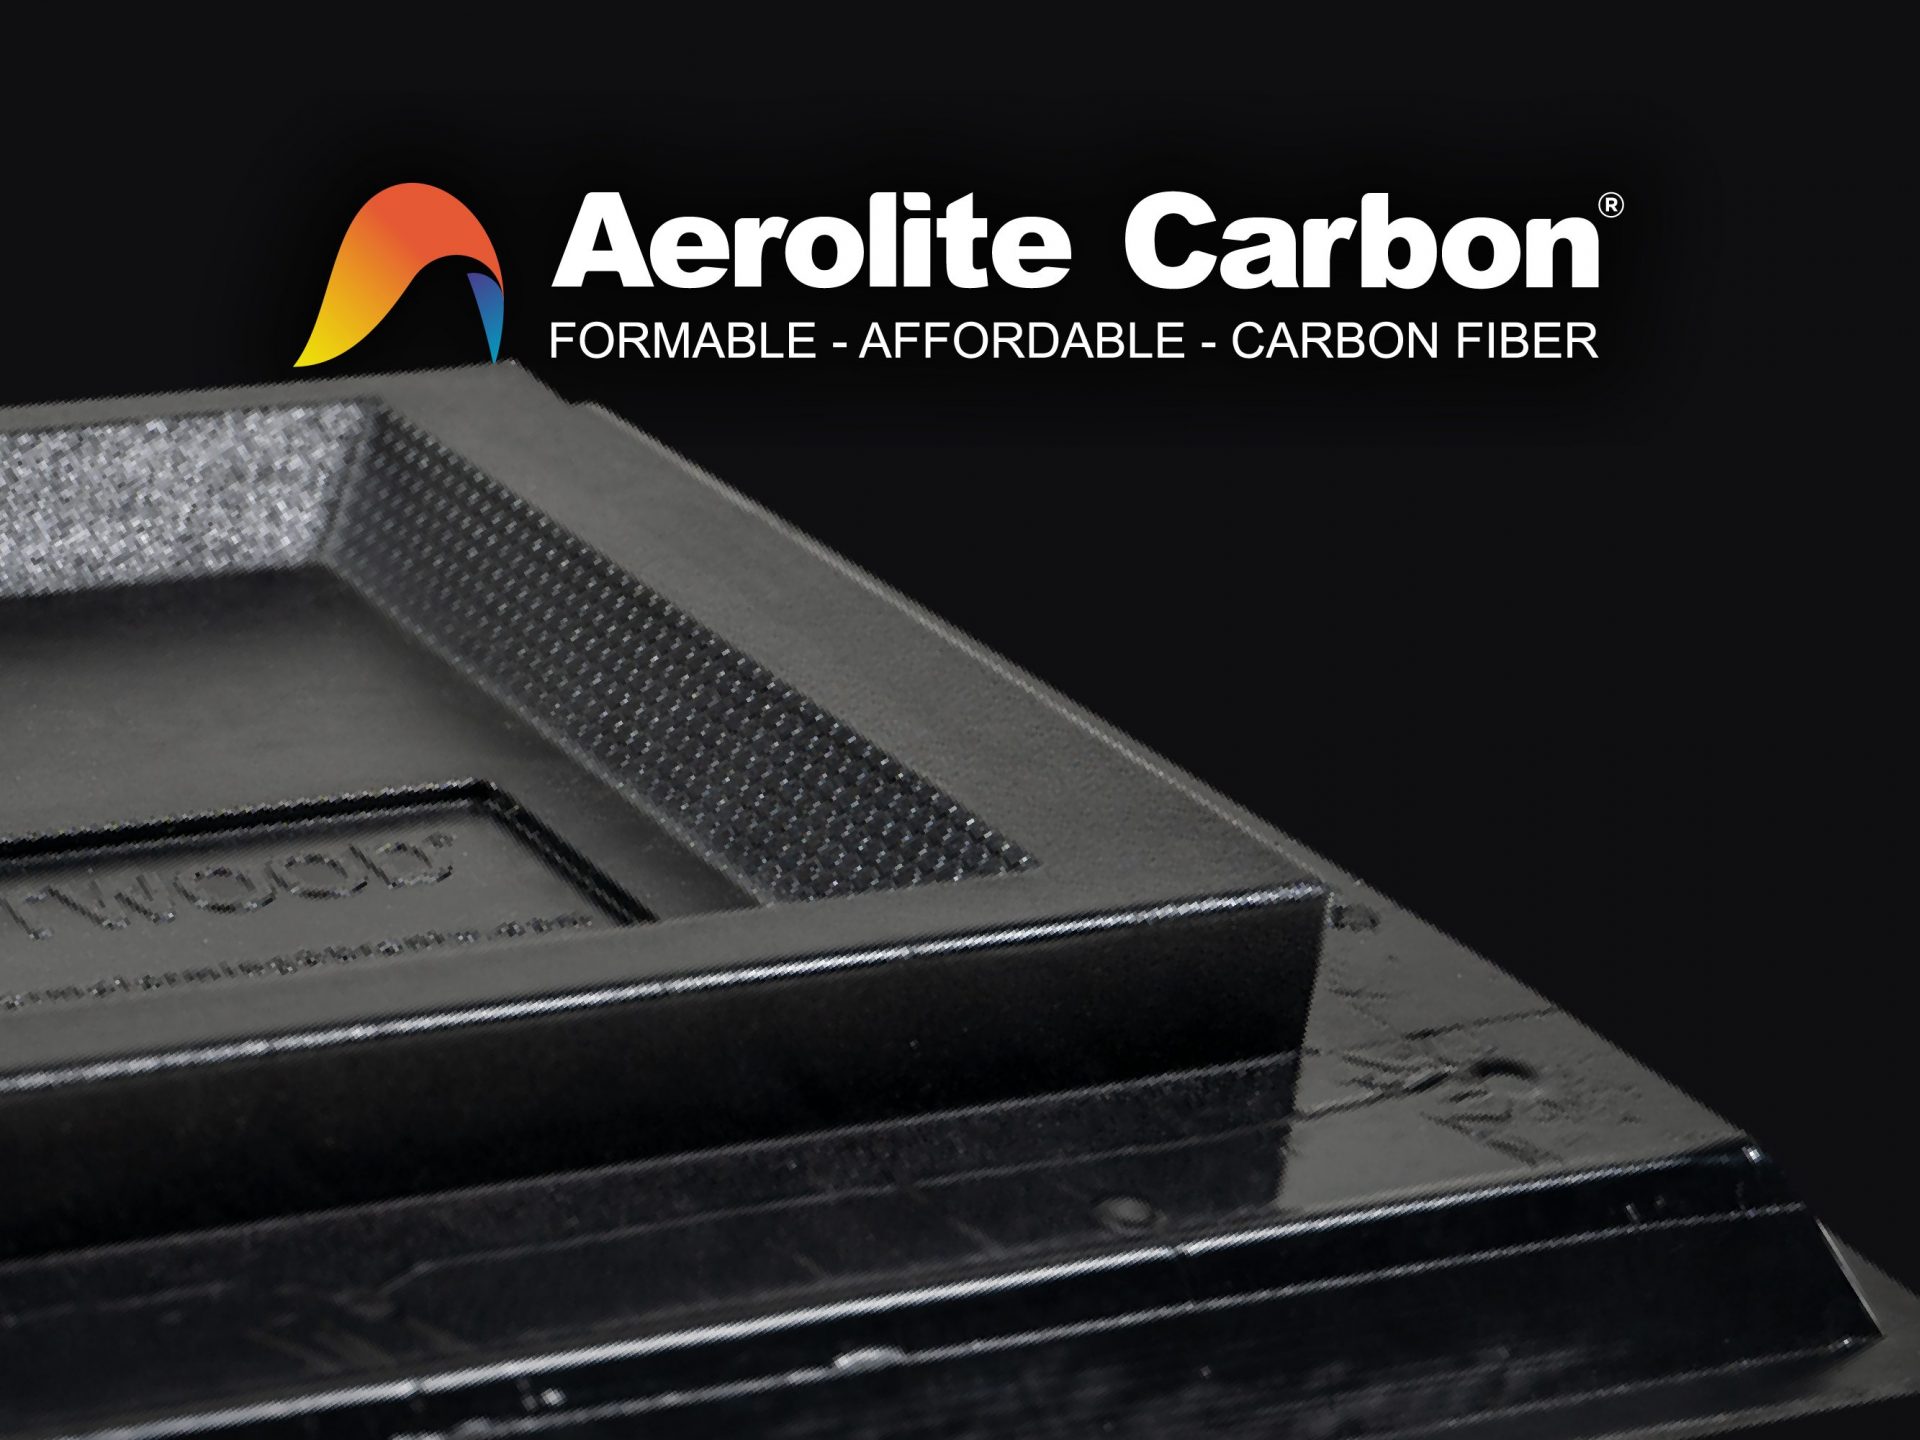 Life in Polymers: Increase Margins with Affordable Carbon Fiber Performance